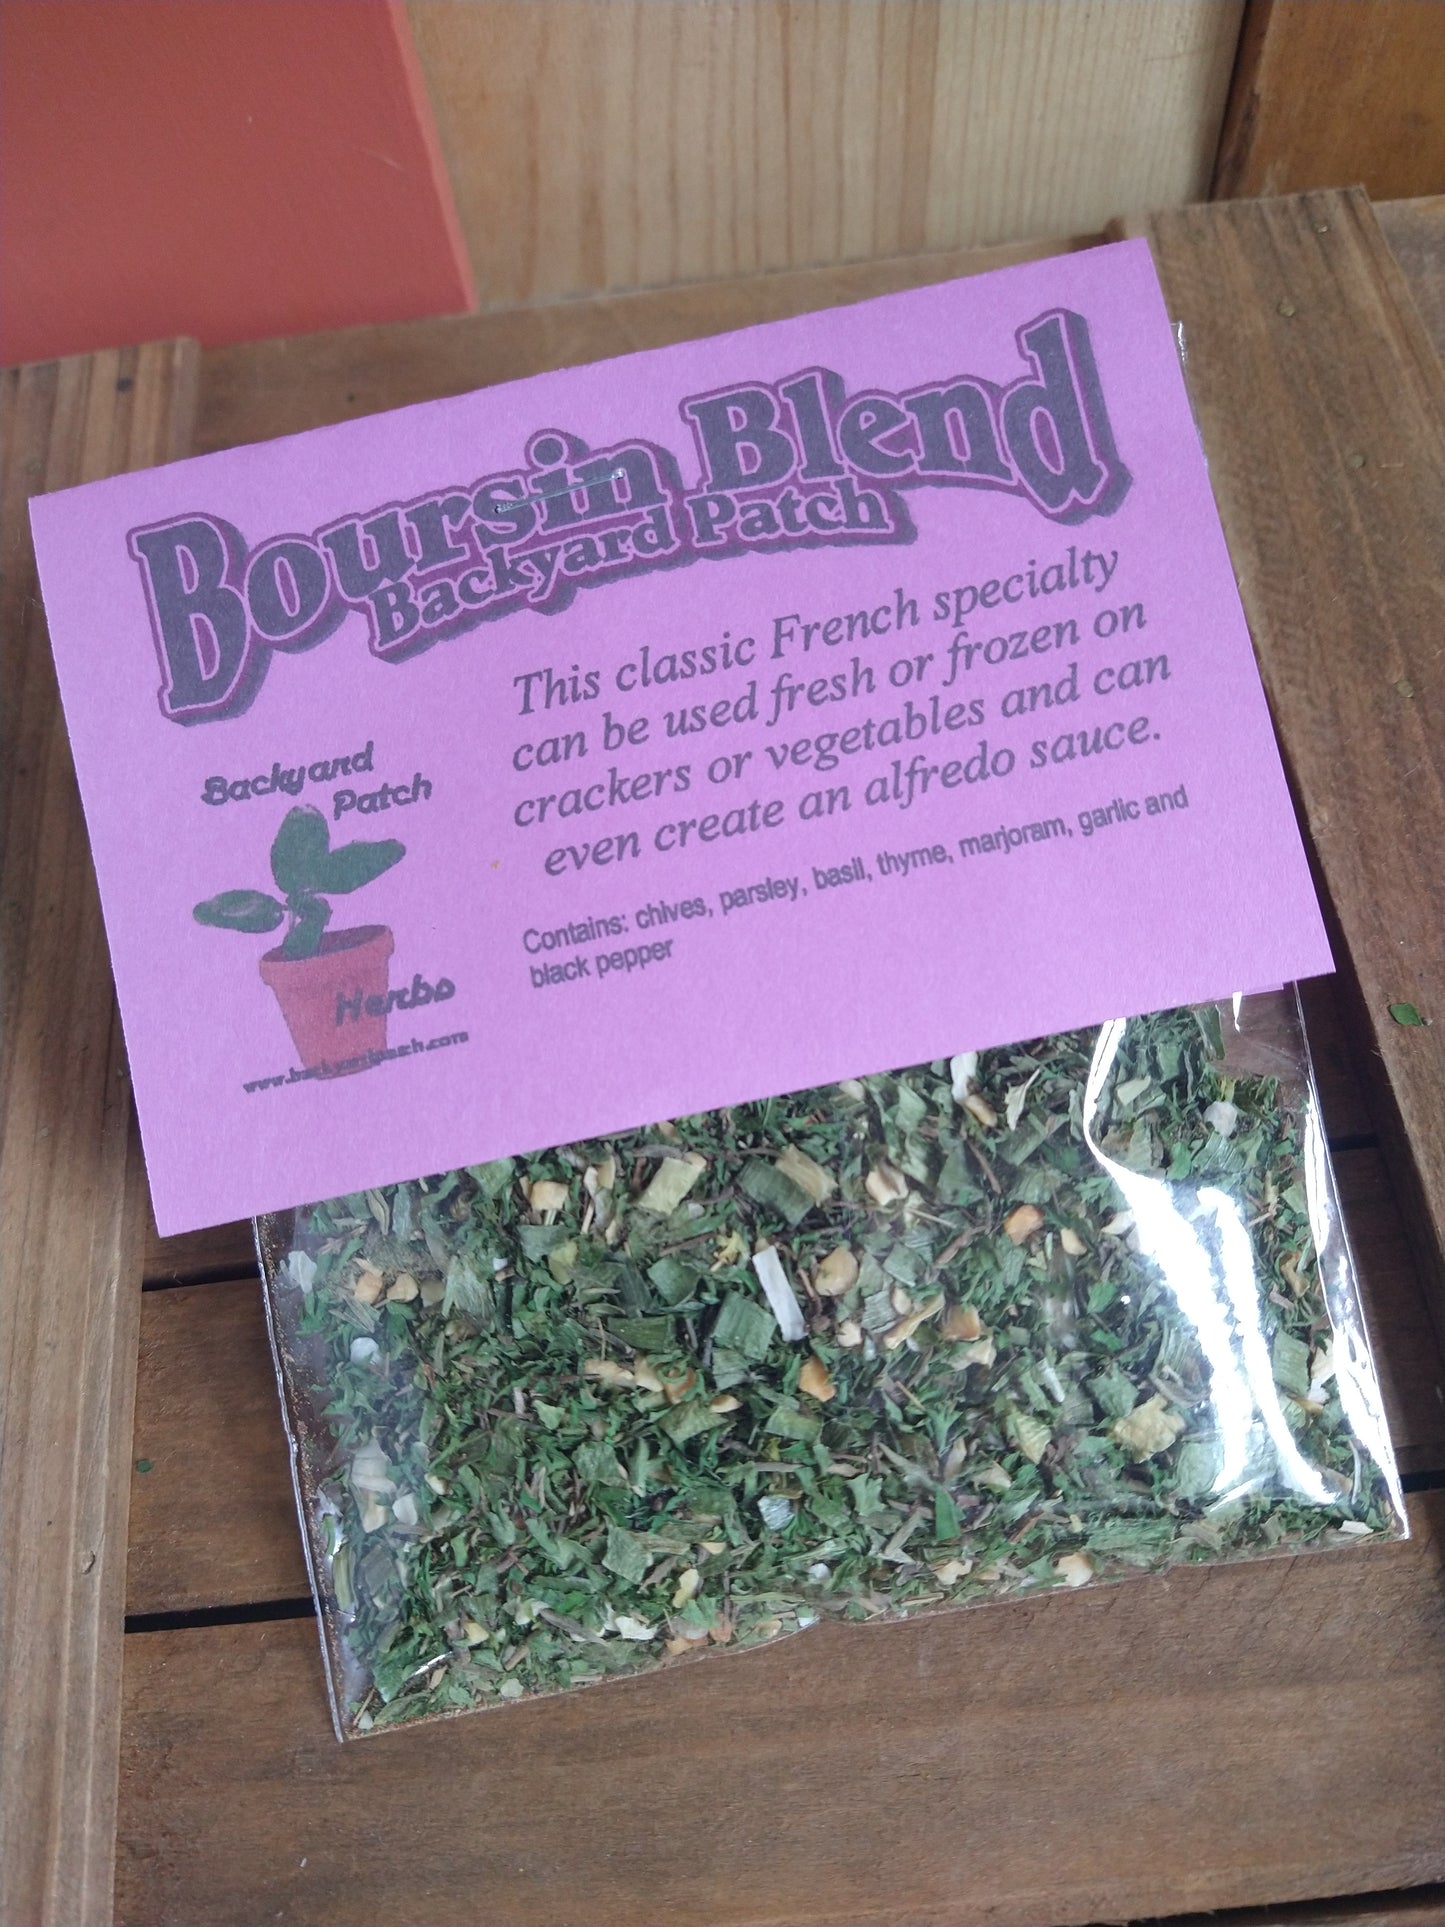 Boursin Cheese Blend, Hand-blended, salt-free, dry Herb Mix, cream cheese mix, savory herbs and garlic